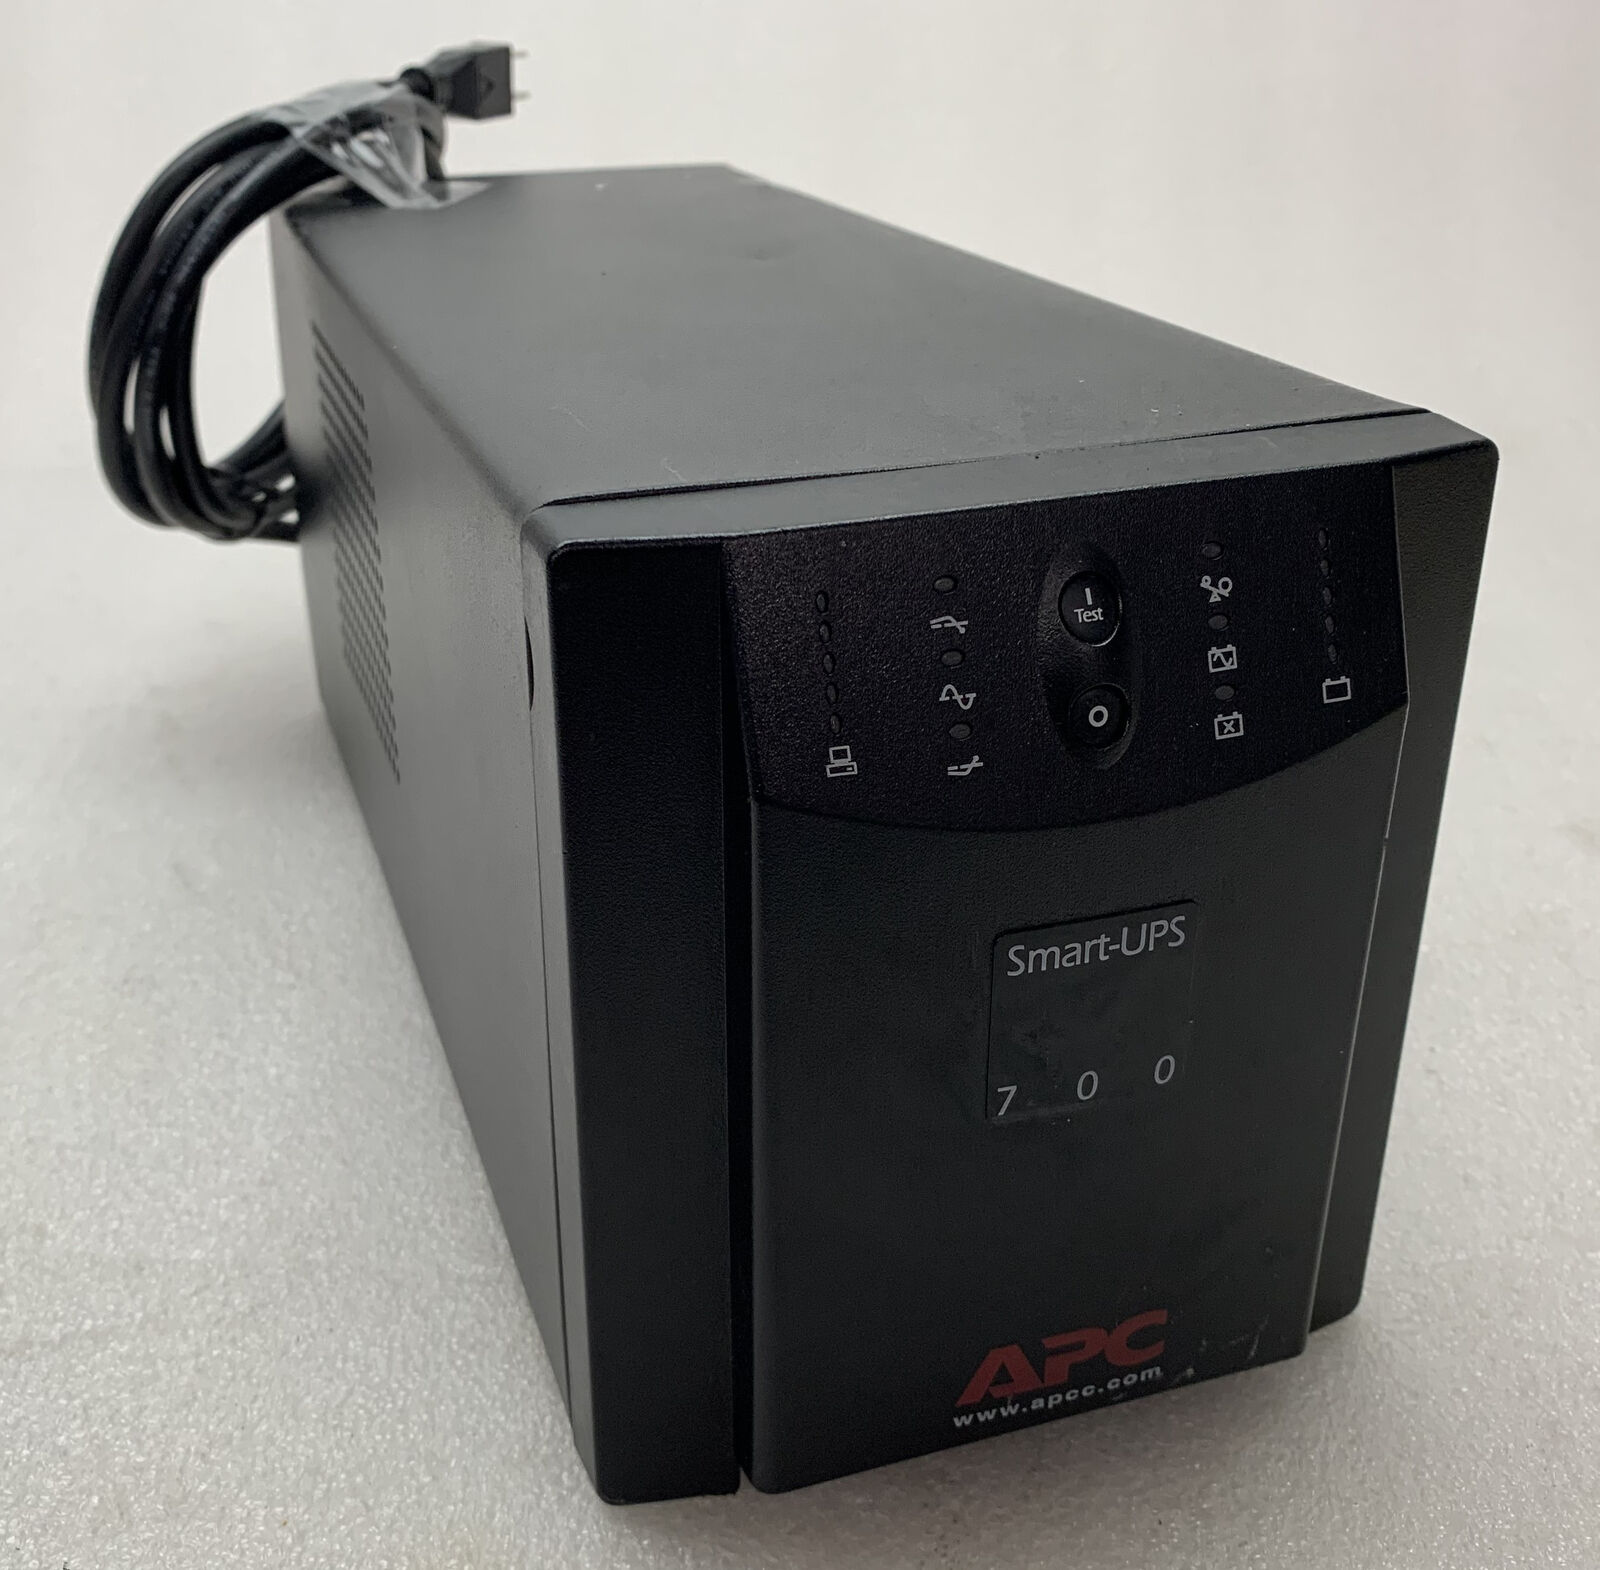 APC Smart-UPS 700 Model: DL700 Uninterruptable Power Supply No Battery Included